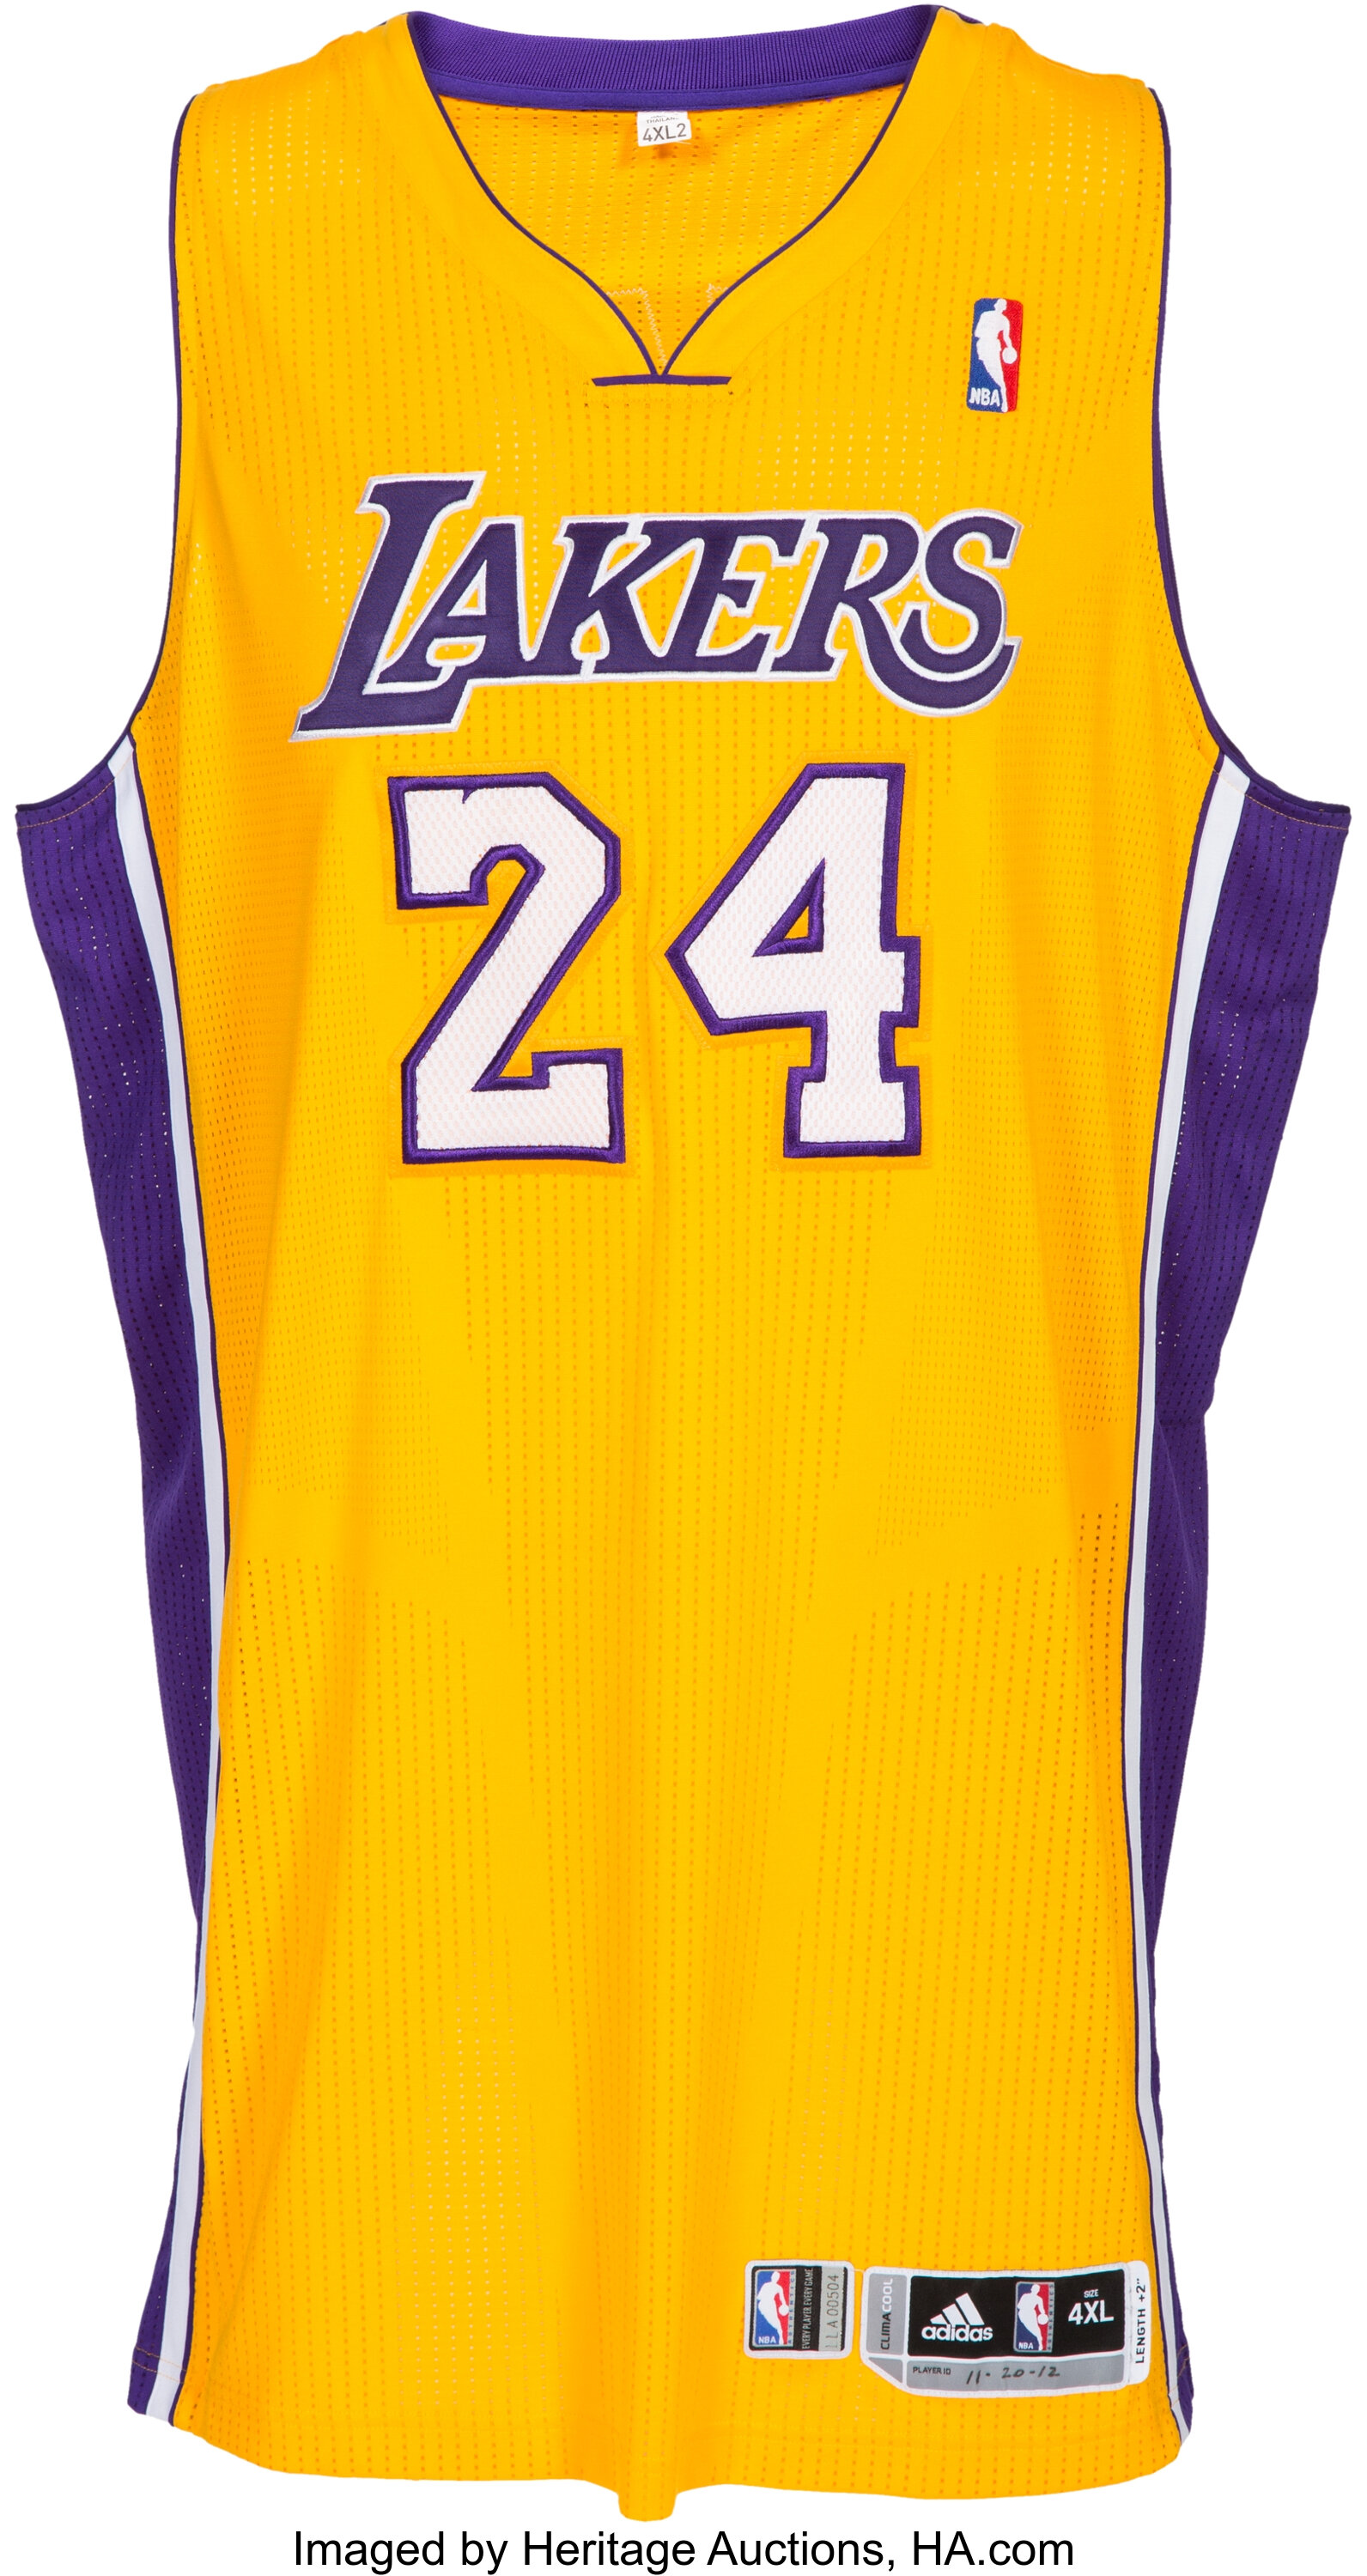 2012 13 Kobe Bryant Game Worn Los Angeles Lakers Jersey With Photo Lot 53090 Heritage Auctions